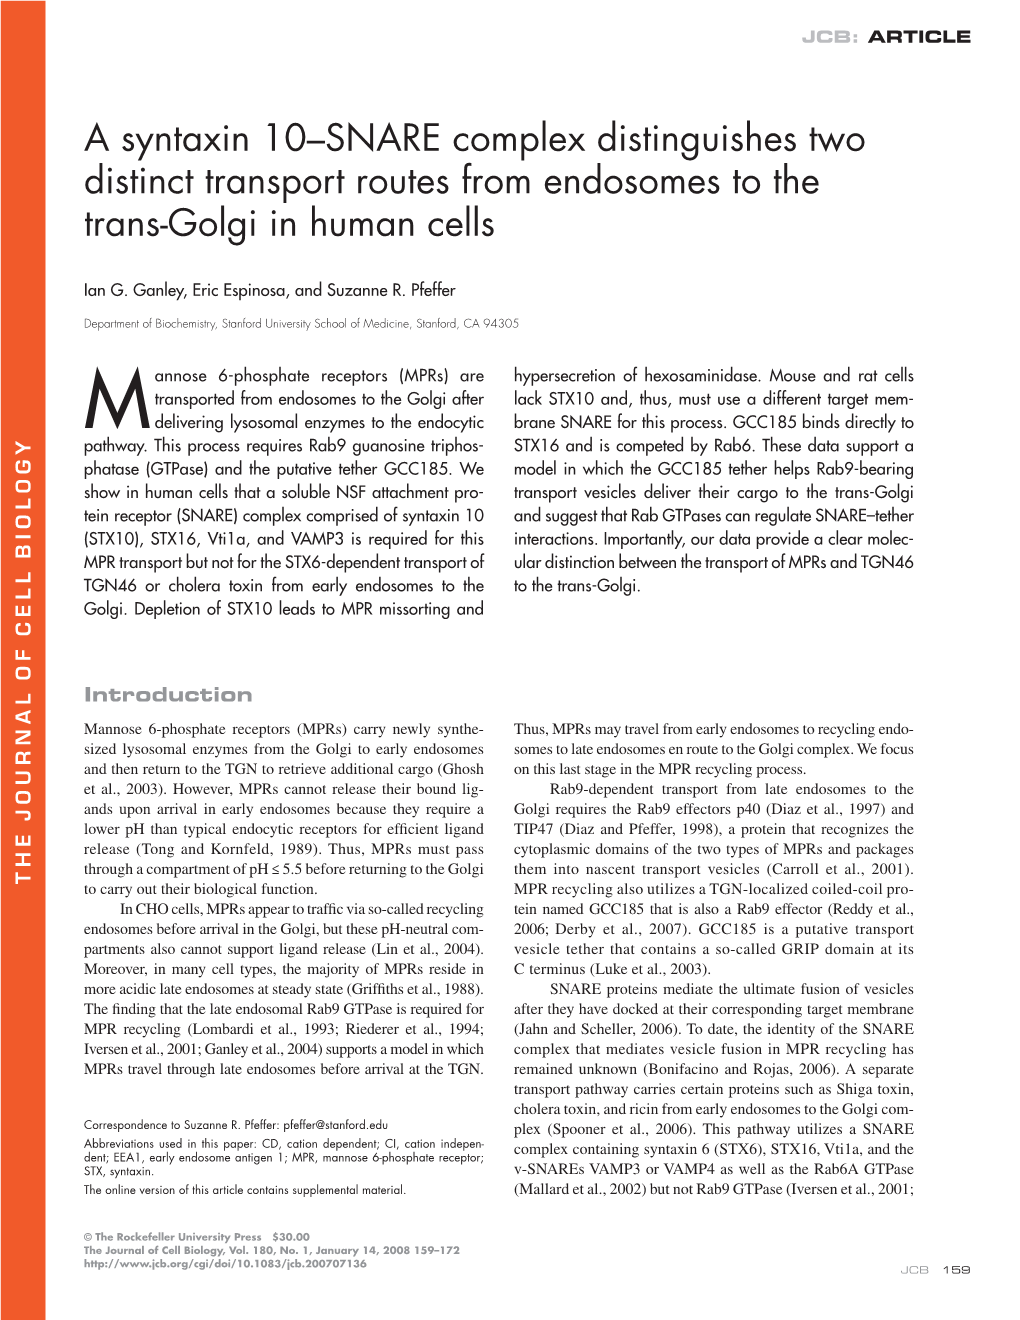 SNARE Complex Distinguishes Two Distinct Transport Routes